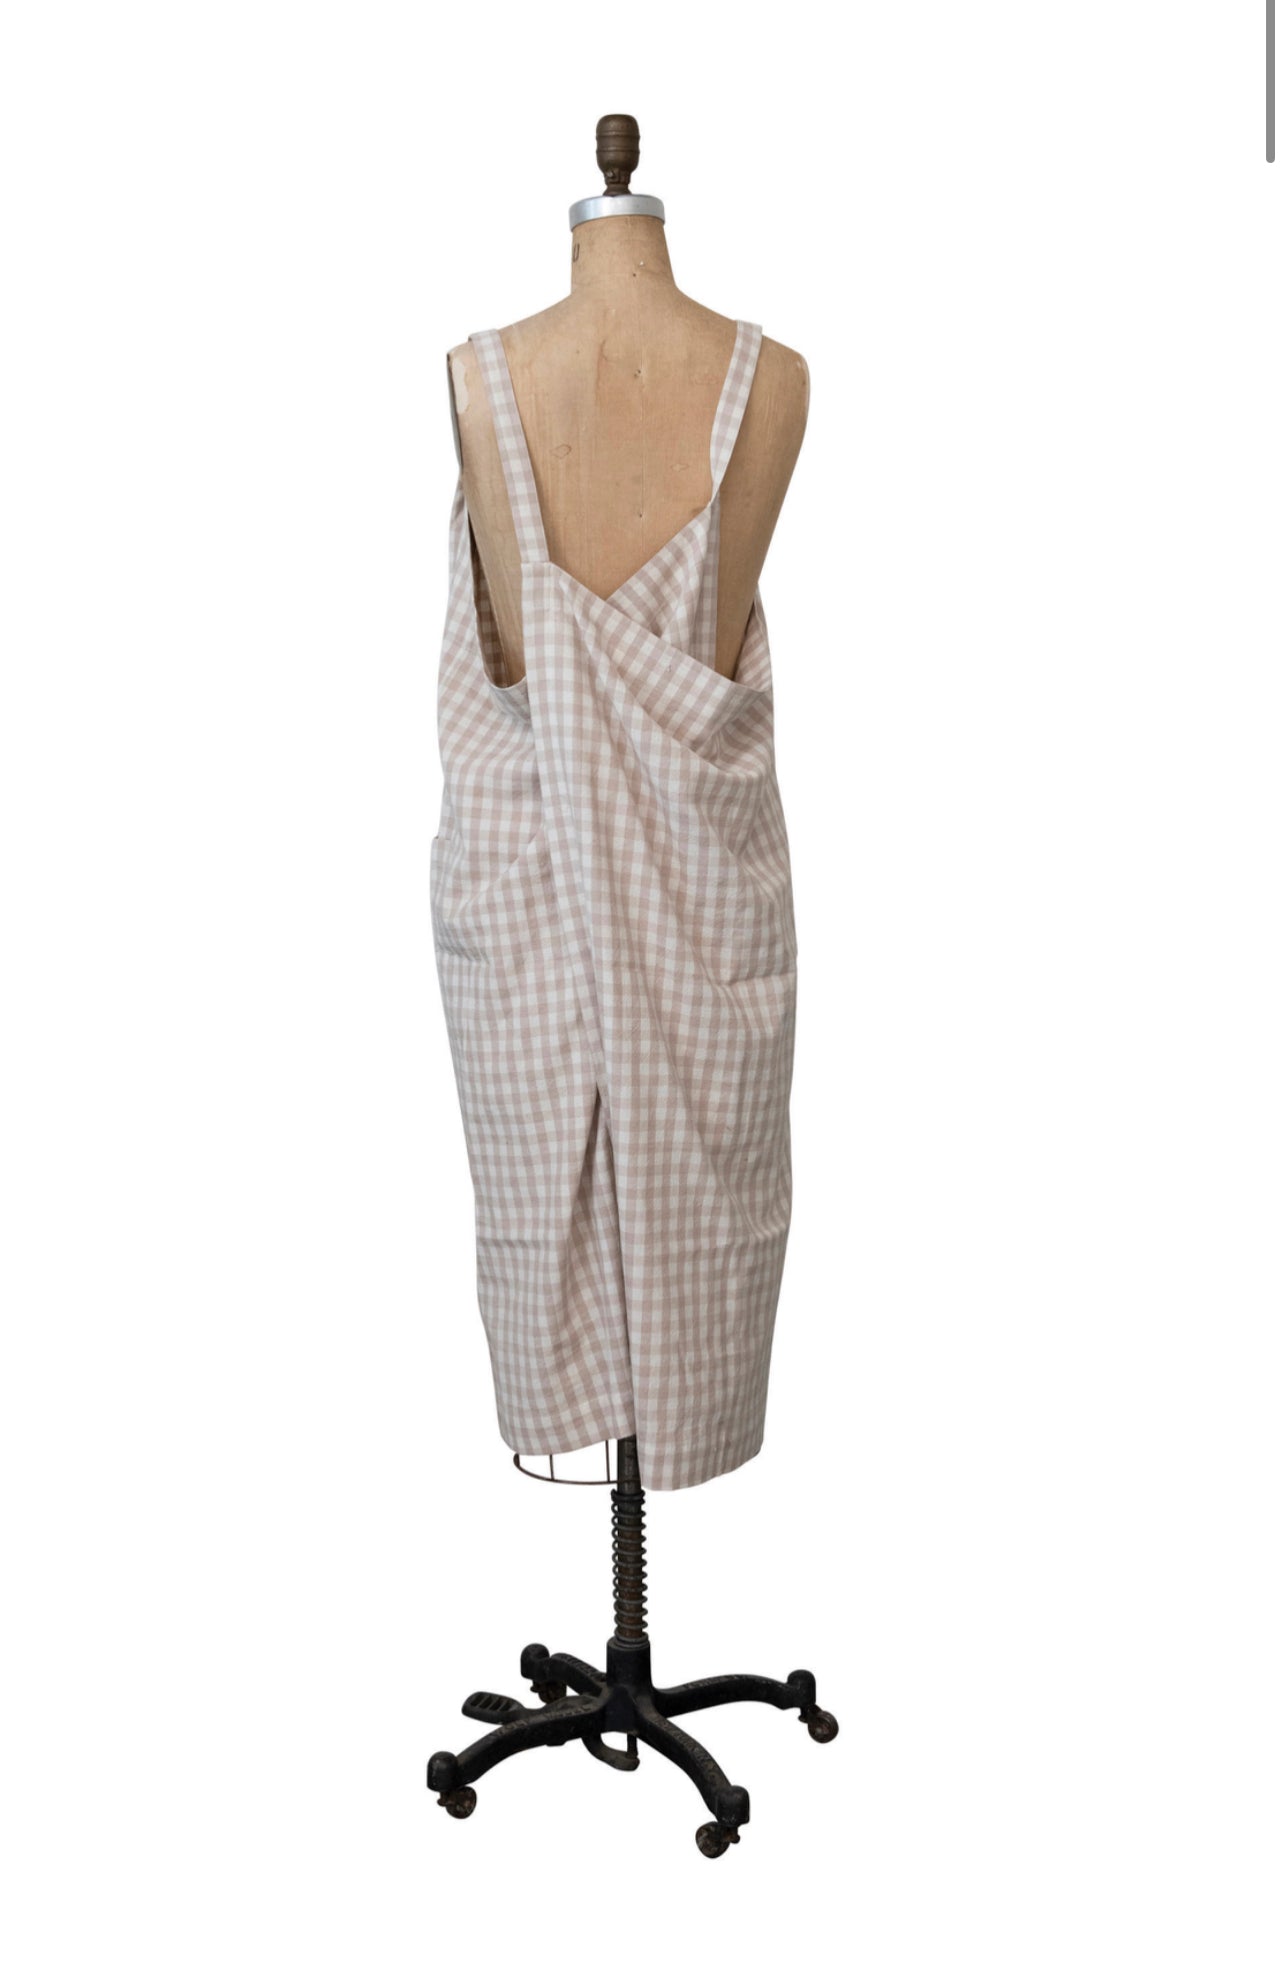 PLAID WOVEN COTTON CROSS BACK APRON WITH ADJUSTABLE STRAPS Aprons Creative Coop   